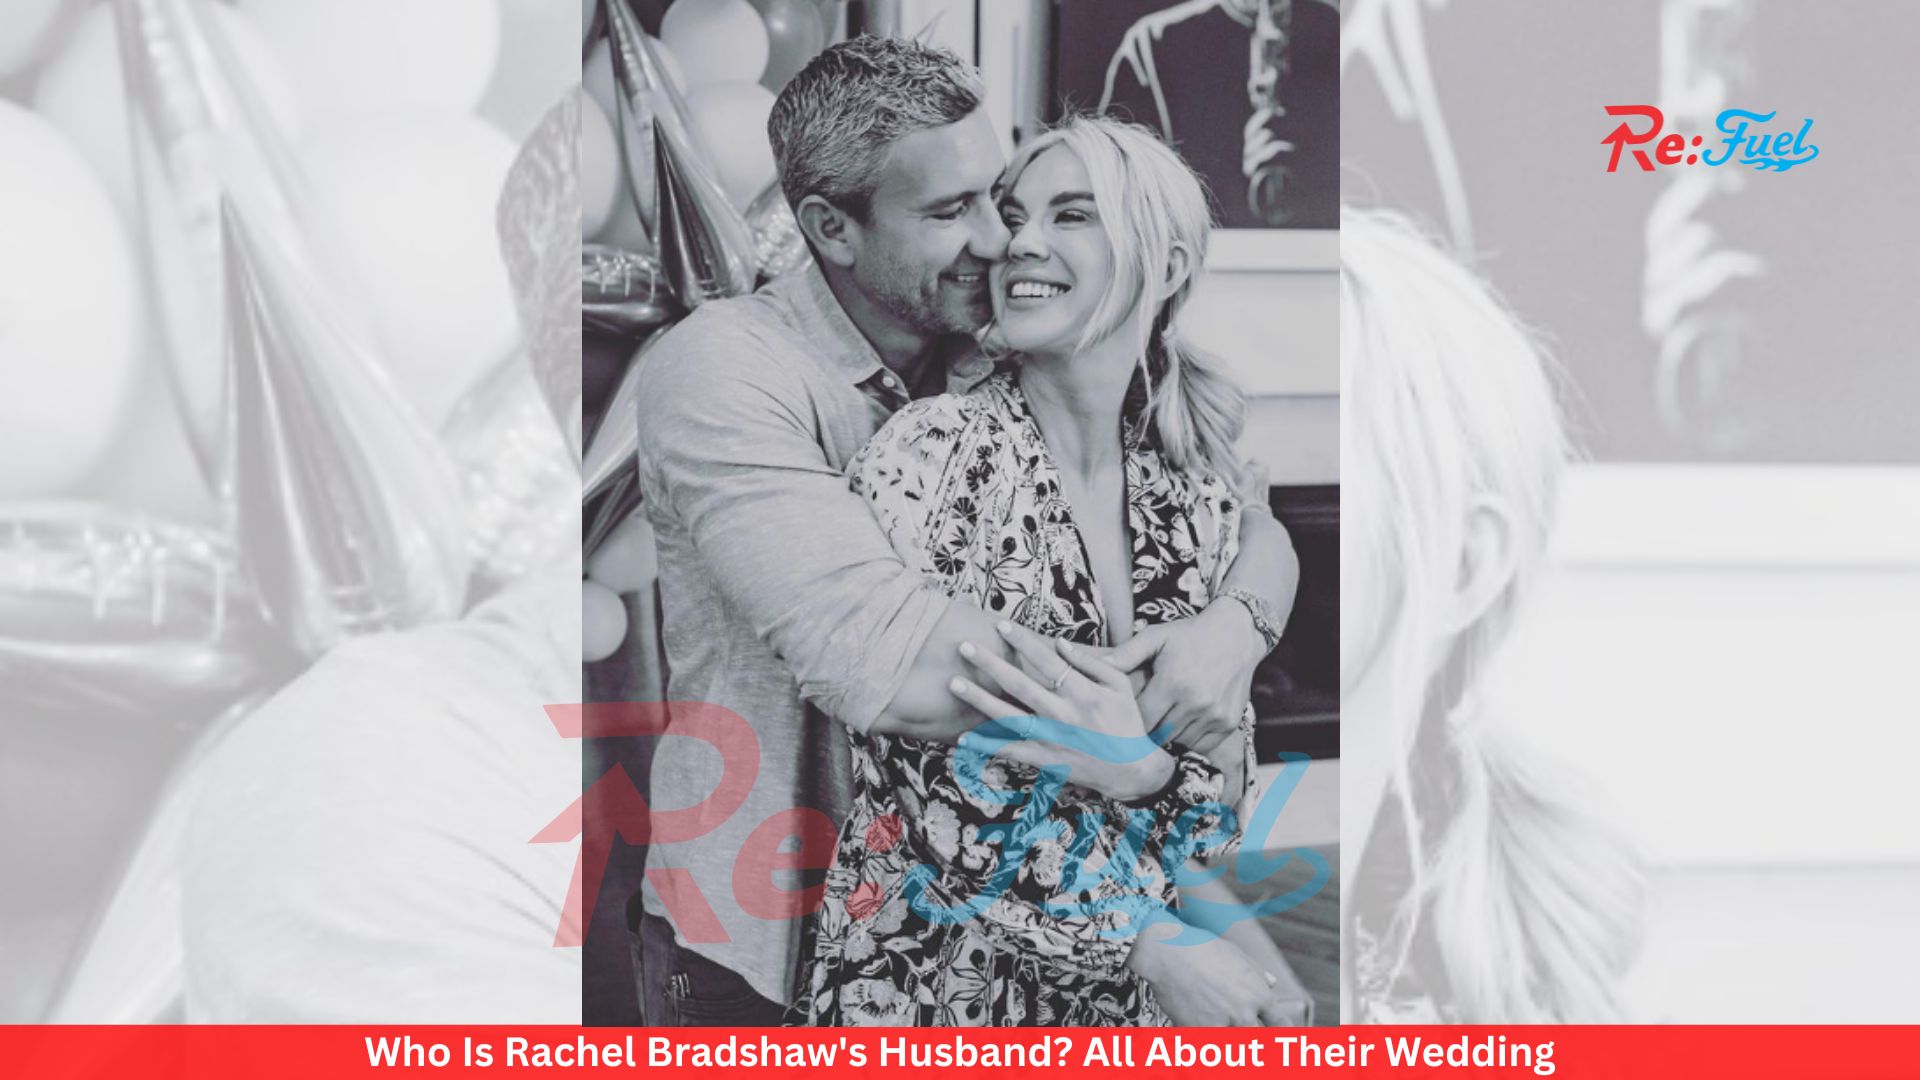 Who Is Rachel Bradshaw's Husband? All About Their Wedding